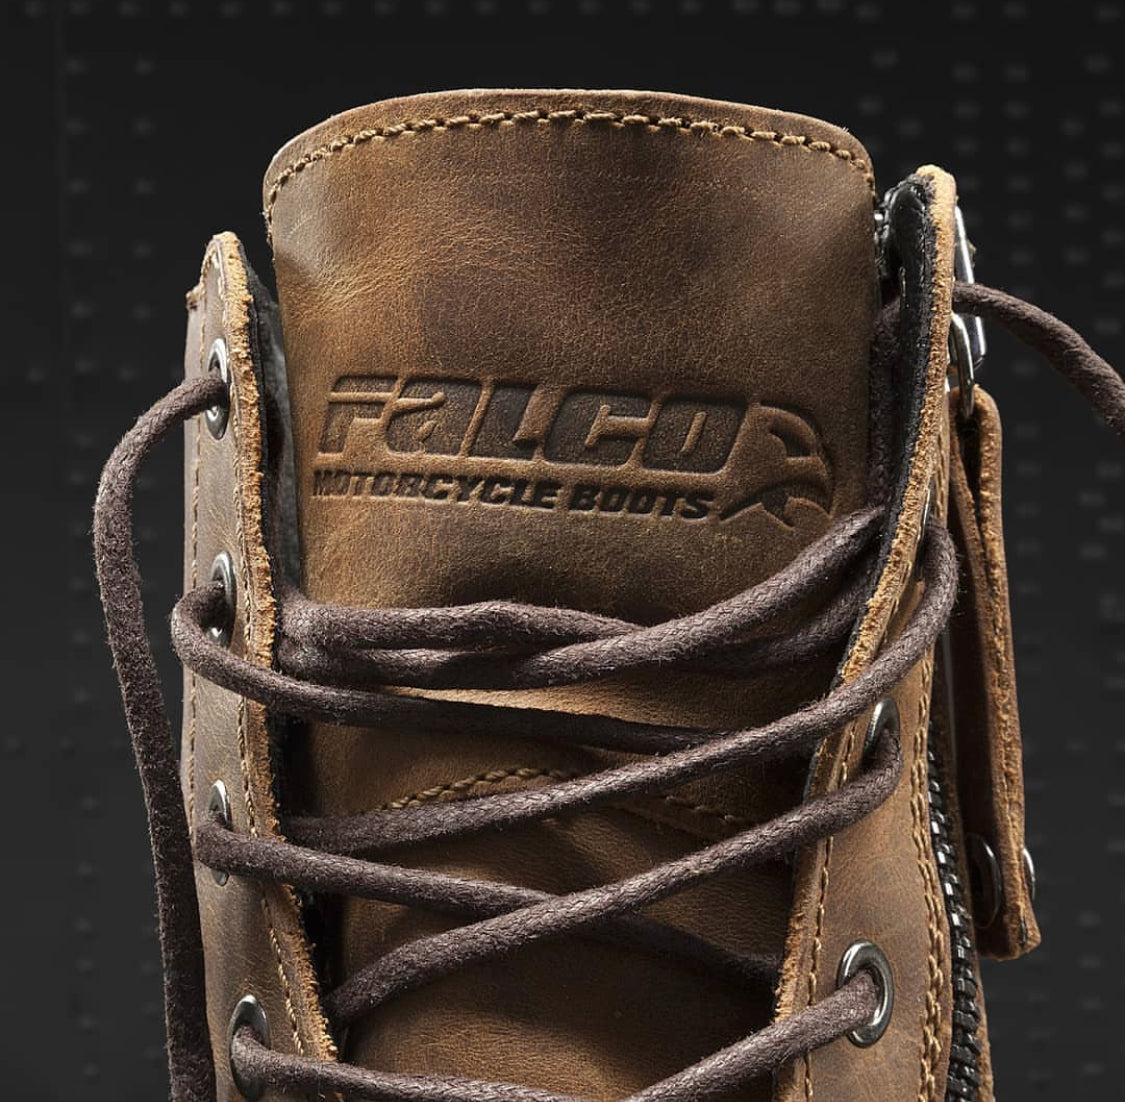 a close up of the brown leather  falco motorcycle boot